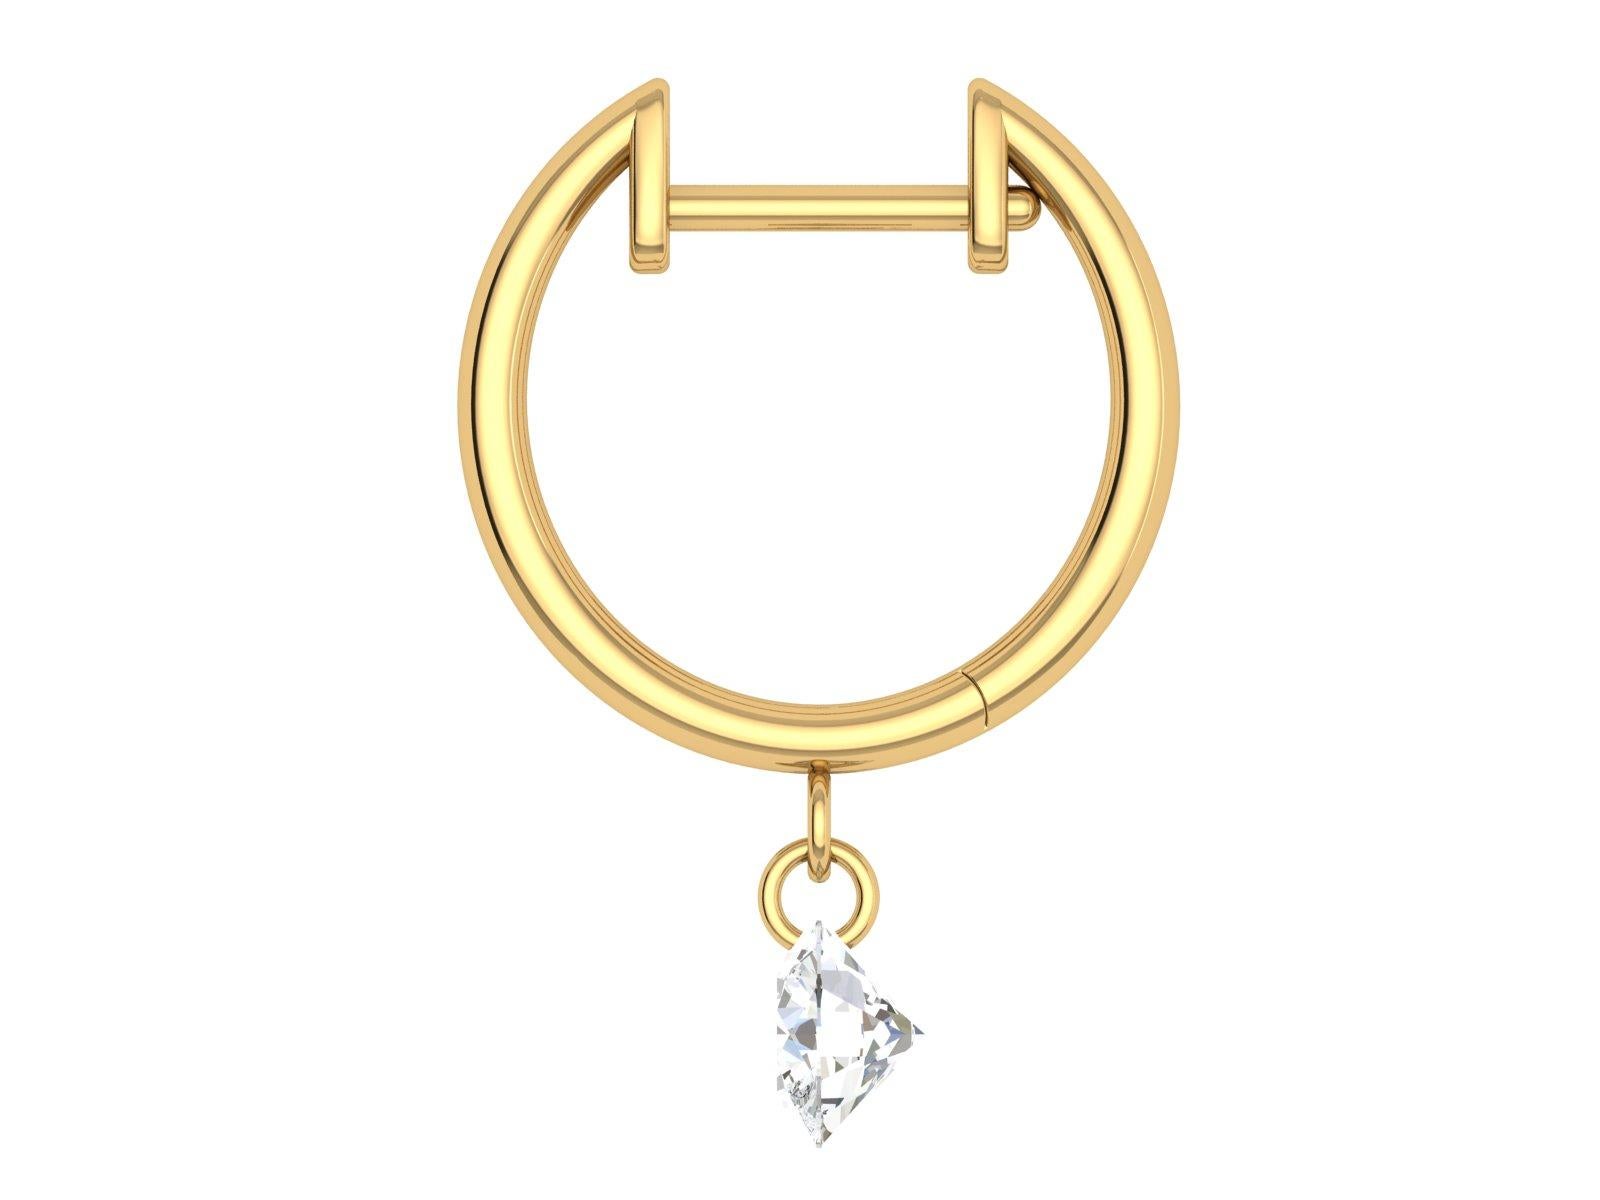 From the Bhansali Air collection, these simple and sophiscated 18kt yellow gold huggies feature a laser drilled diamond (.53cts)  dangle. What makes this piece so unique is that the diamond has no setting, which means no prongs! The diamond appears